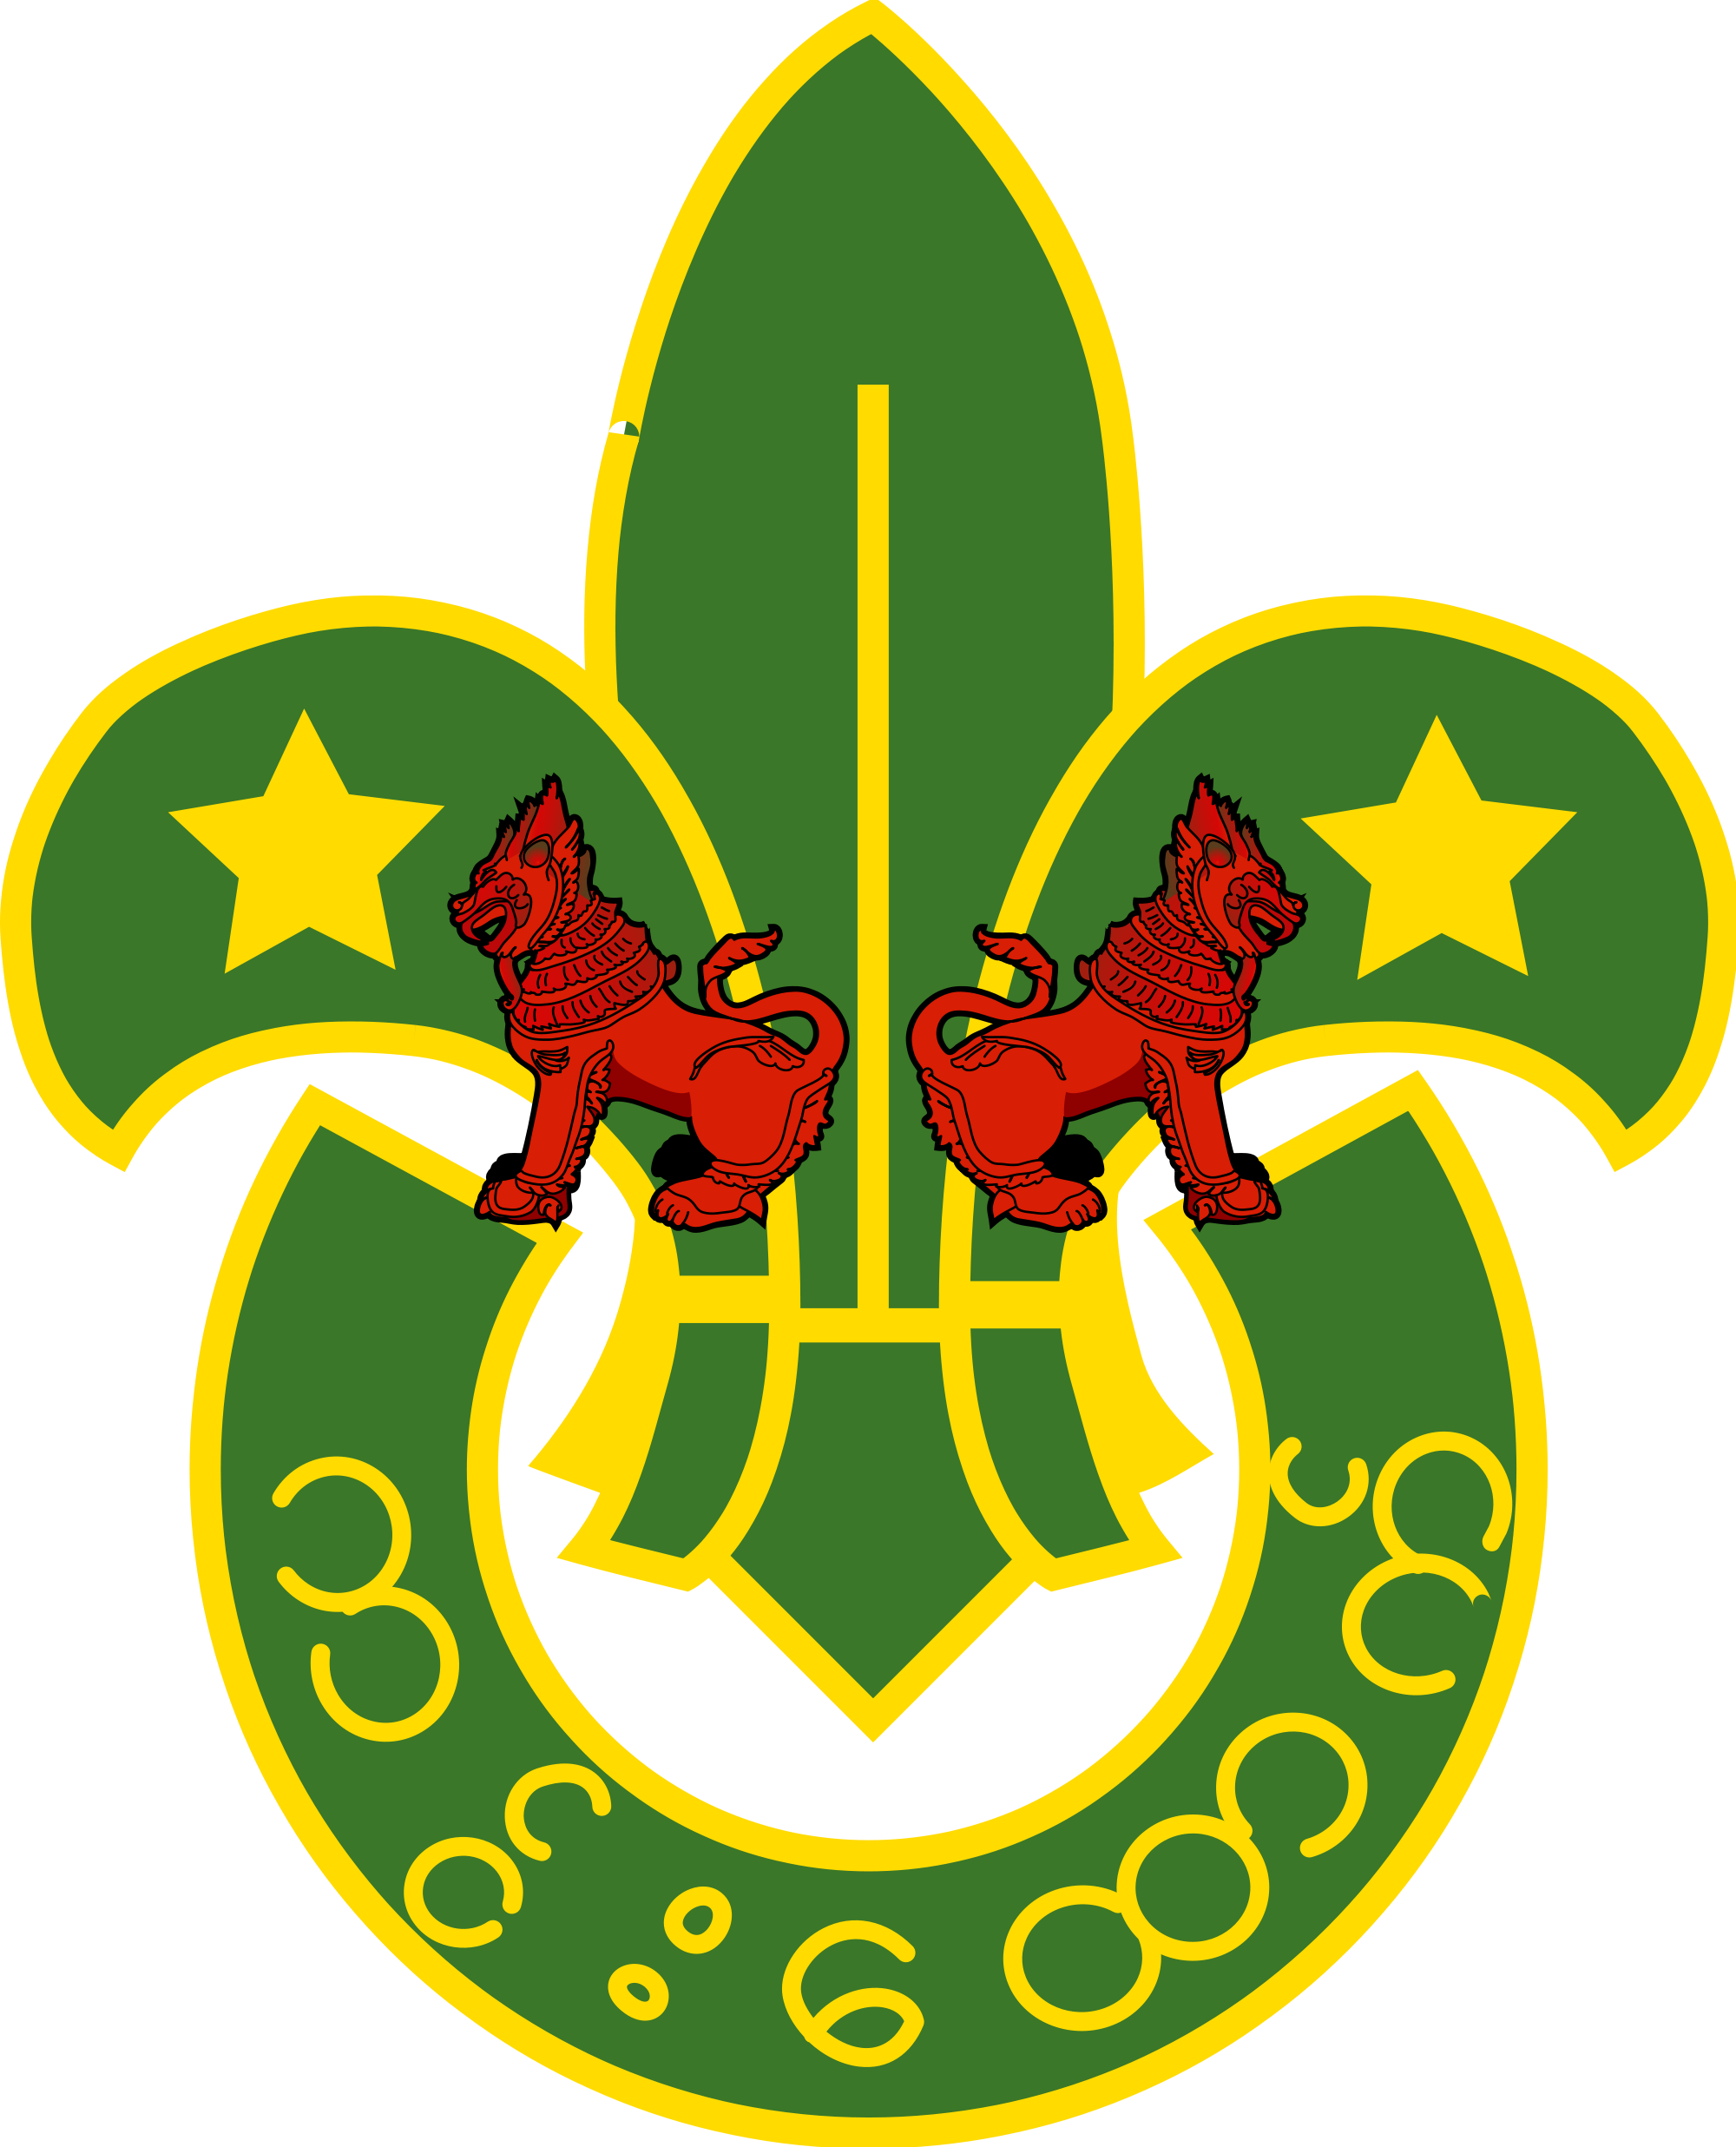 Union Of Burma Boy Scouts - World Scout Logo Meaning (2000x2473)